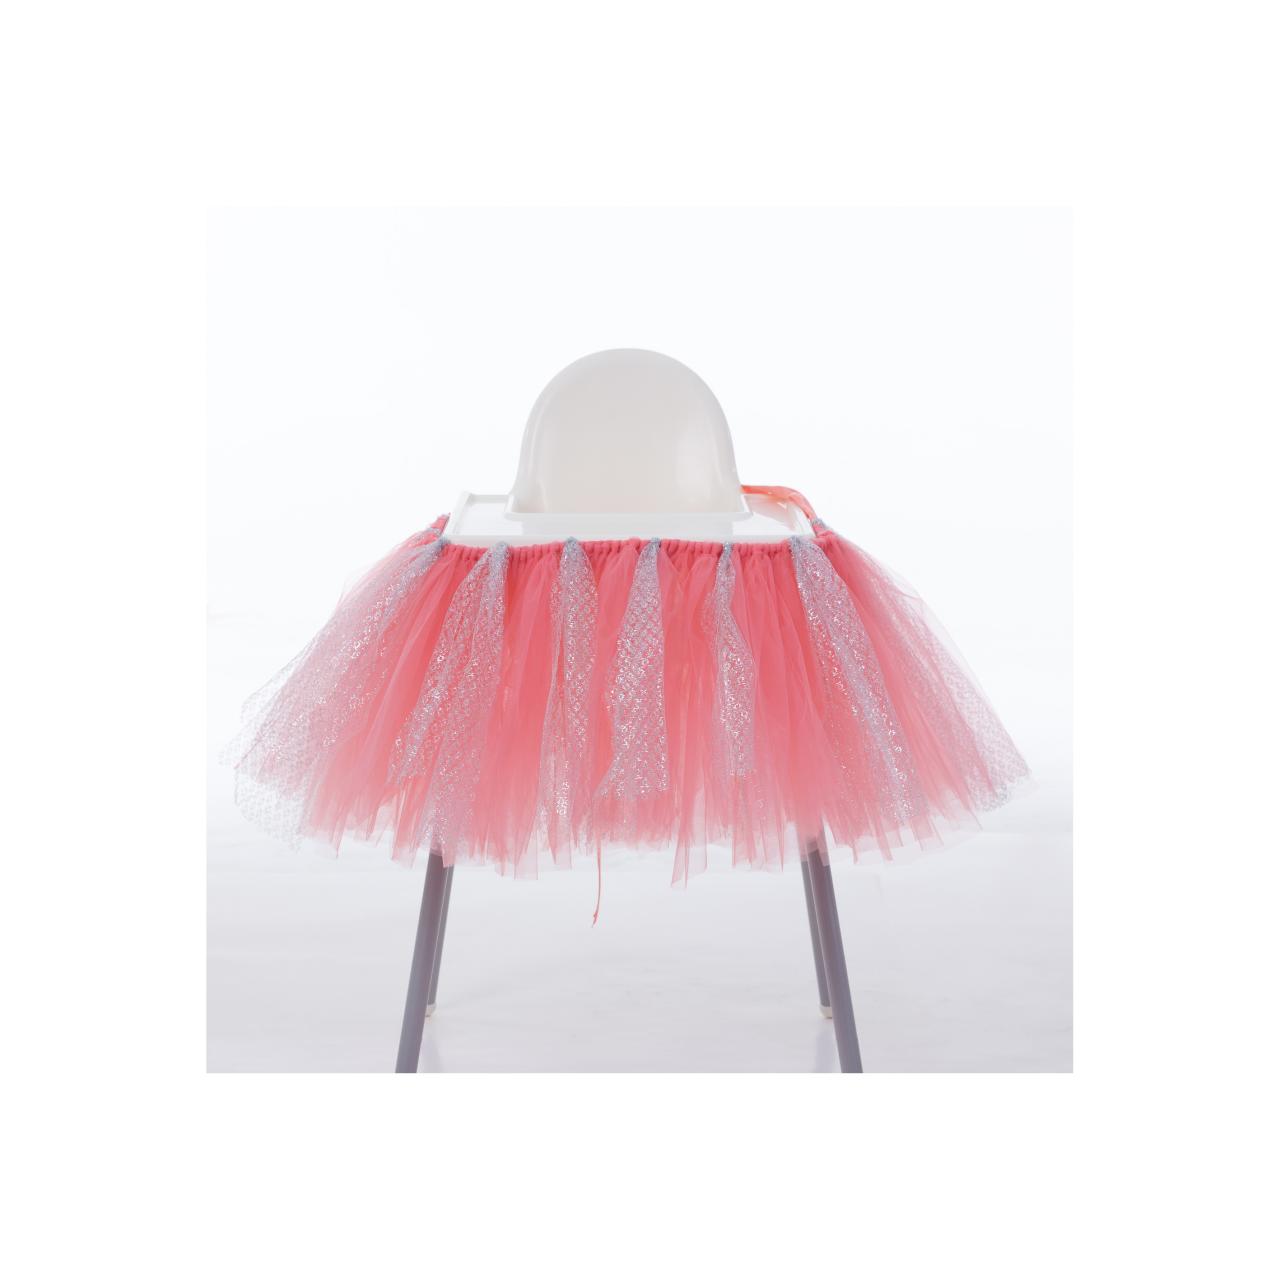 Tutu Tulle Table Skirts High Chair Decor Baby Shower Decorations for Boys Girls Party Set Birthday Party Supplies coral+silver